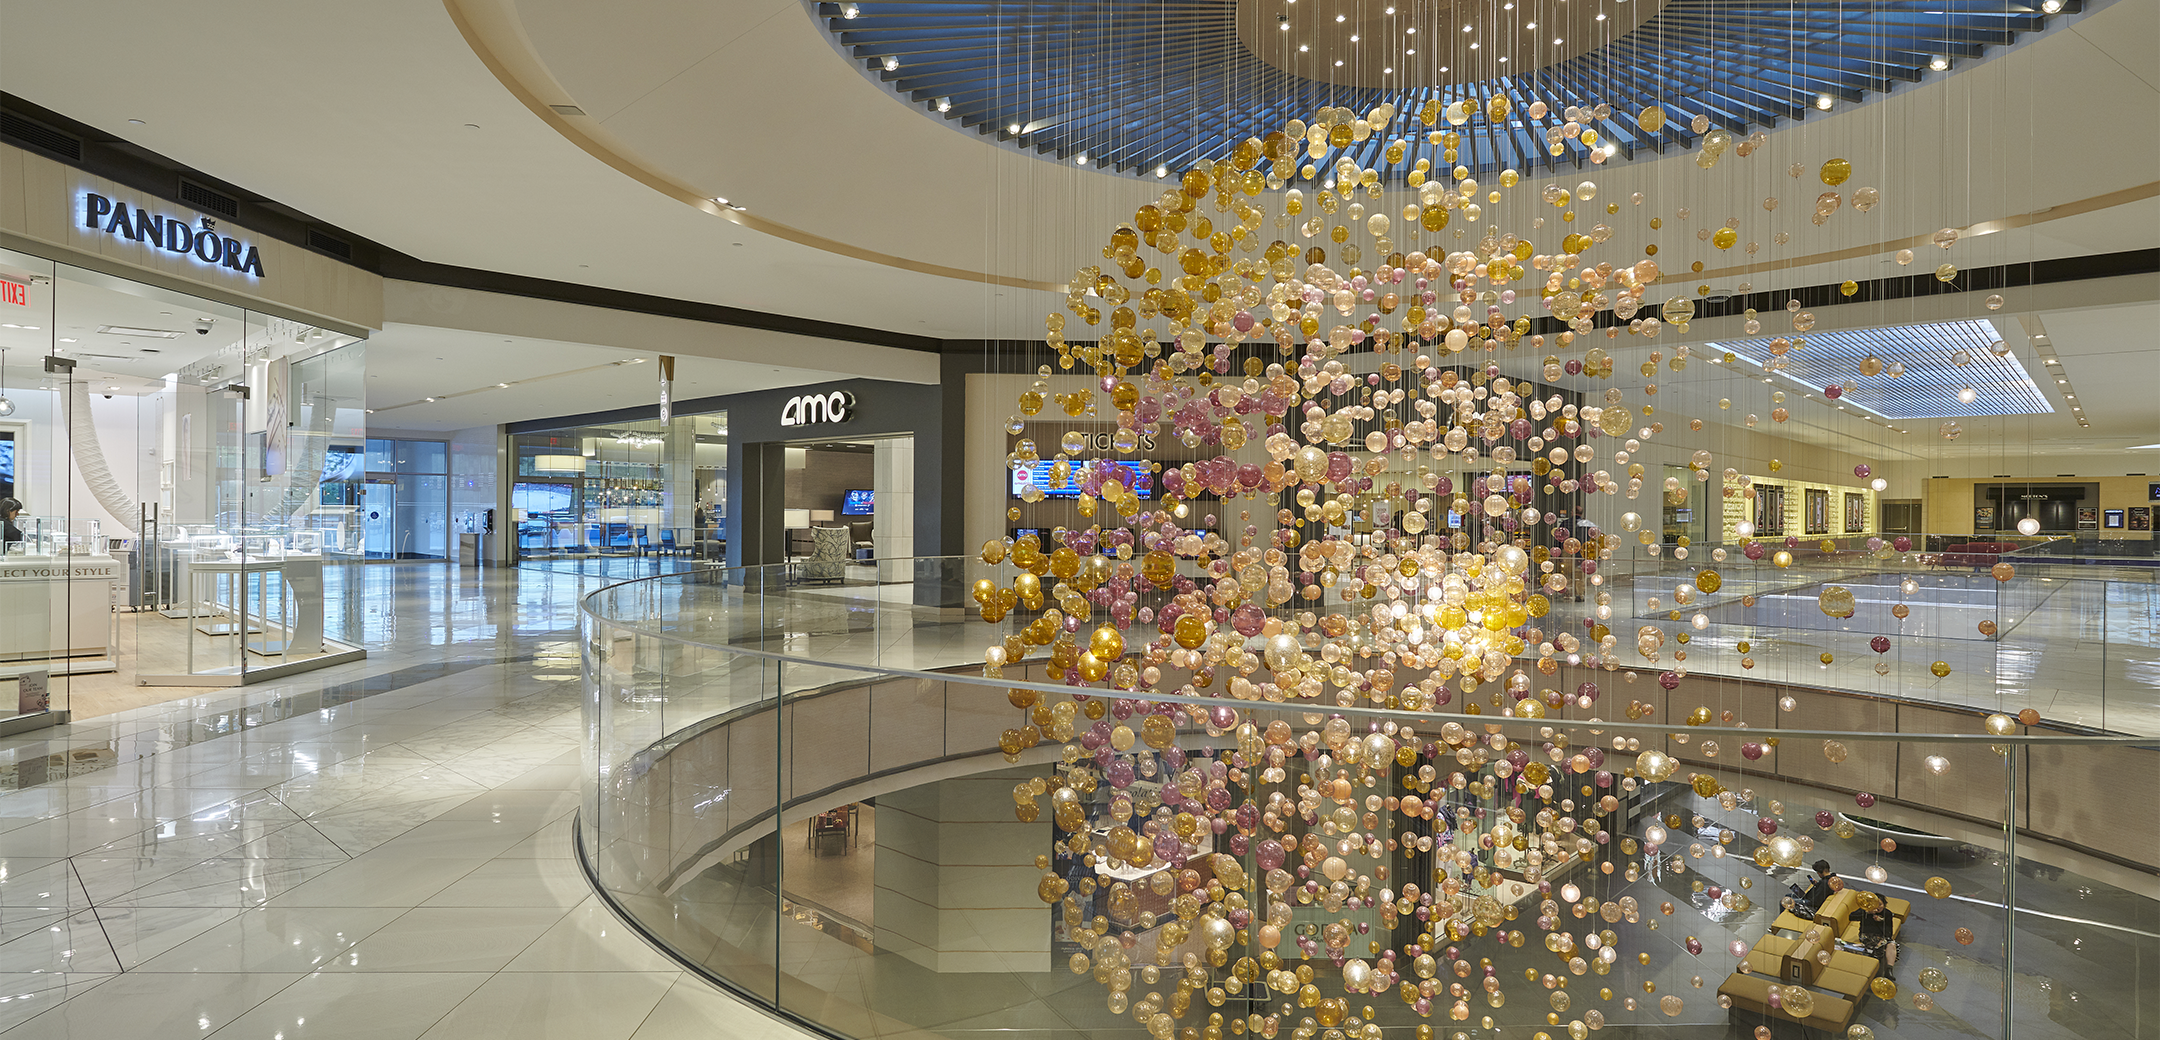 An interior view of the Shops at Riverside mall, showcasing the circular second floor balcony hole peering down to the first floor and a large light installation made of small yellow bubbles going down the balcony.